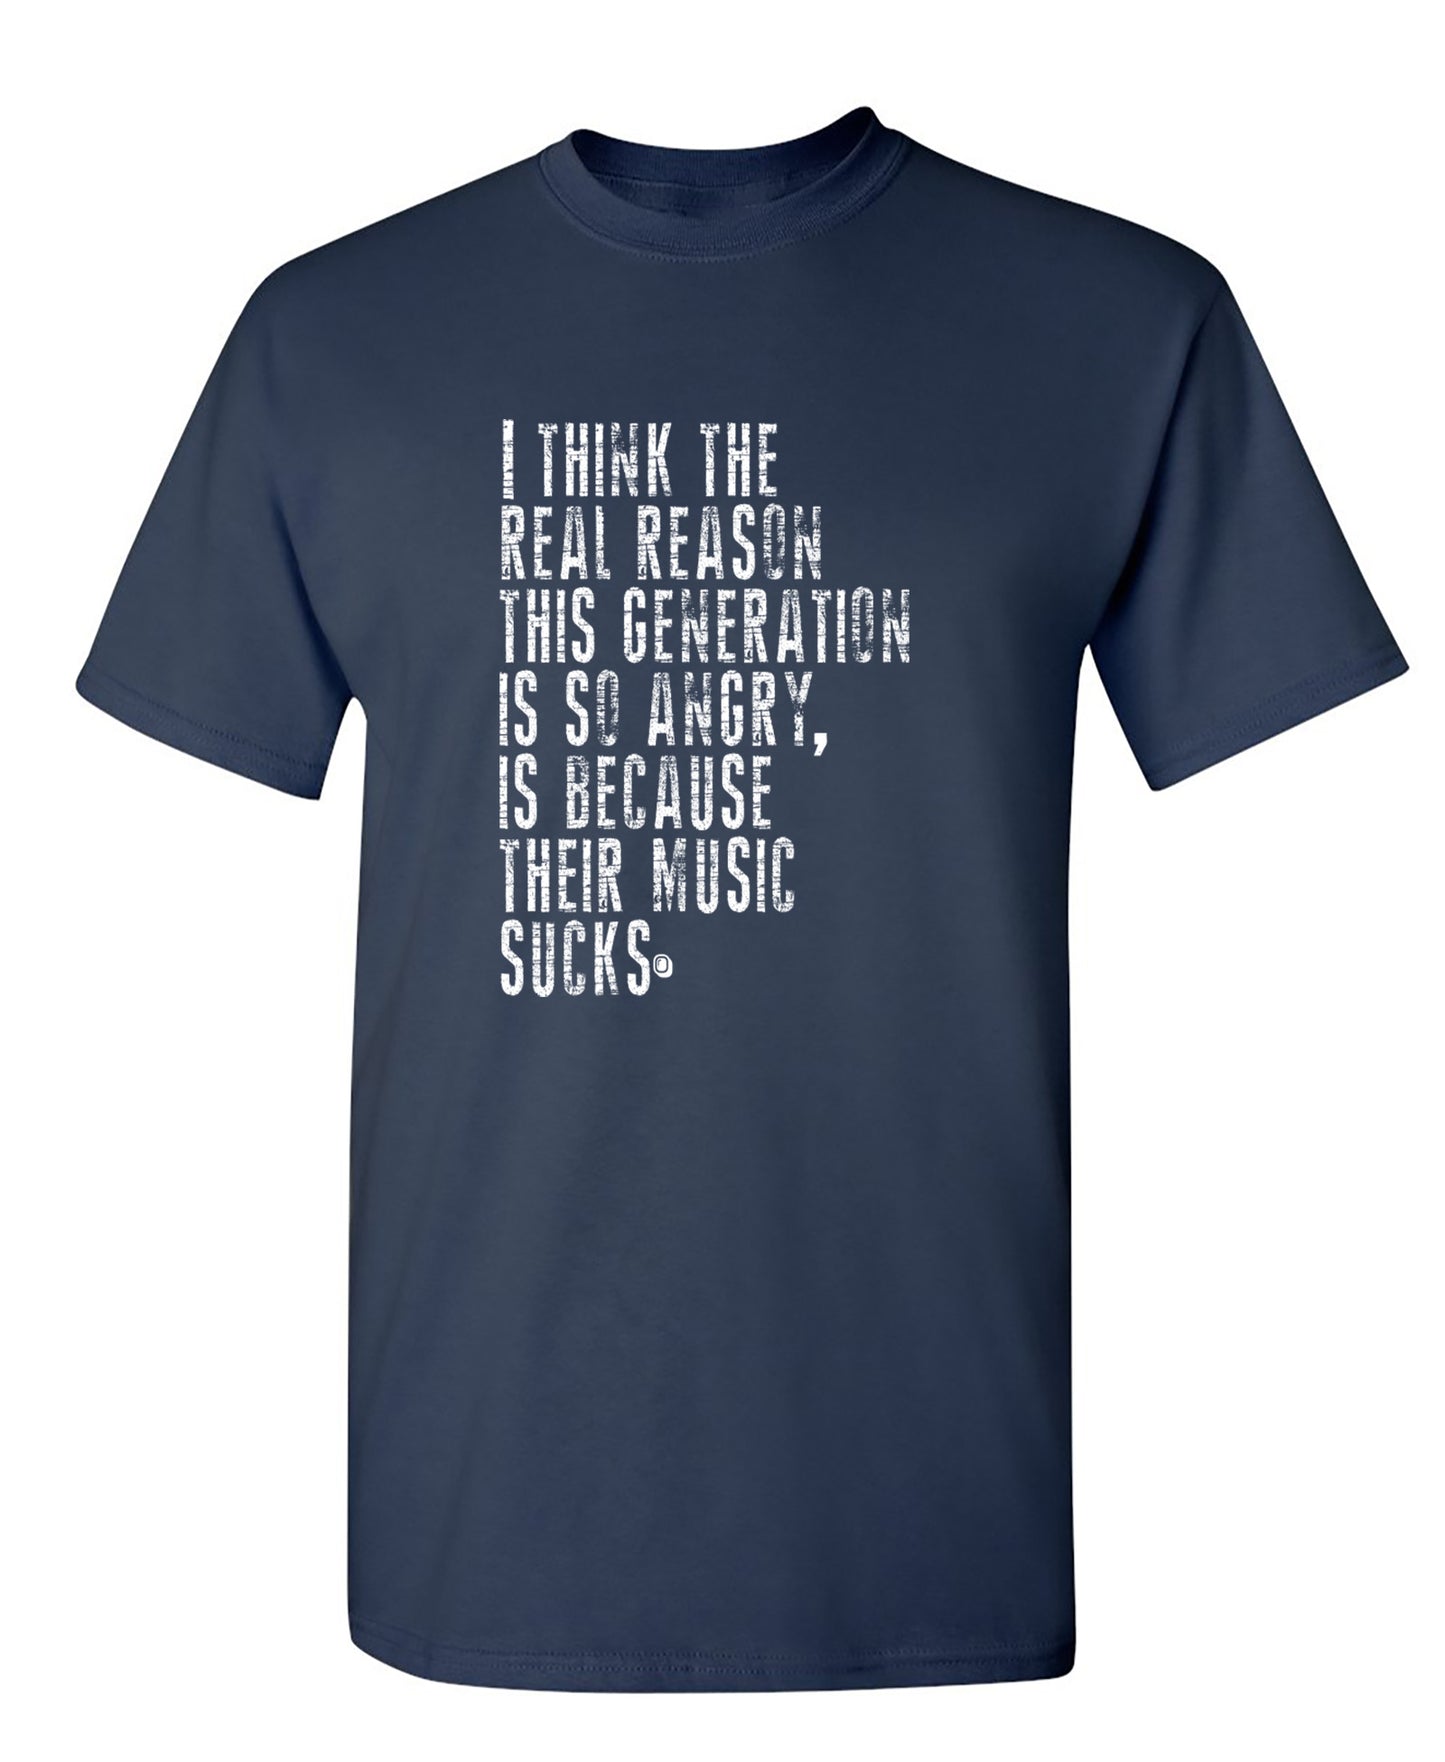 This Generation Is So Angry - Funny T Shirts & Graphic Tees